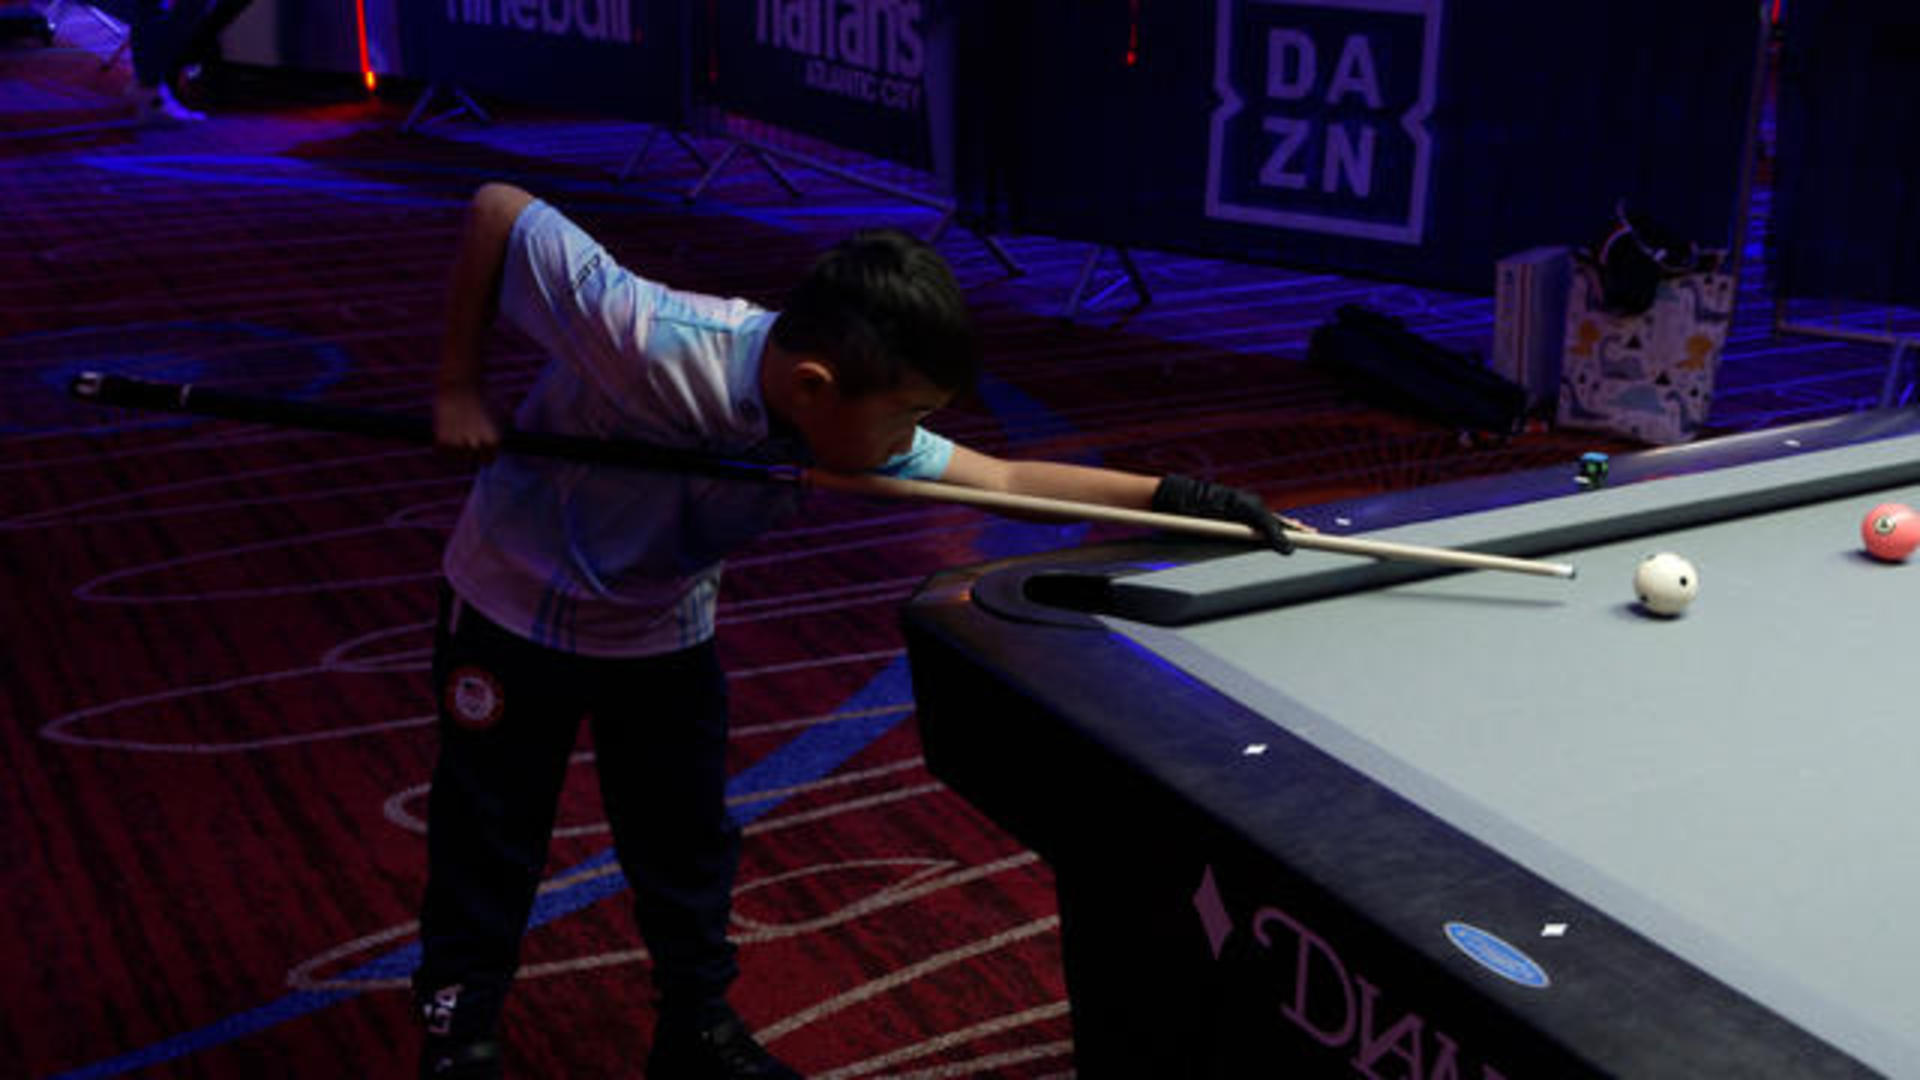 Has Billiards Gained a New Life Since It Can Be Played Digitally? - News 